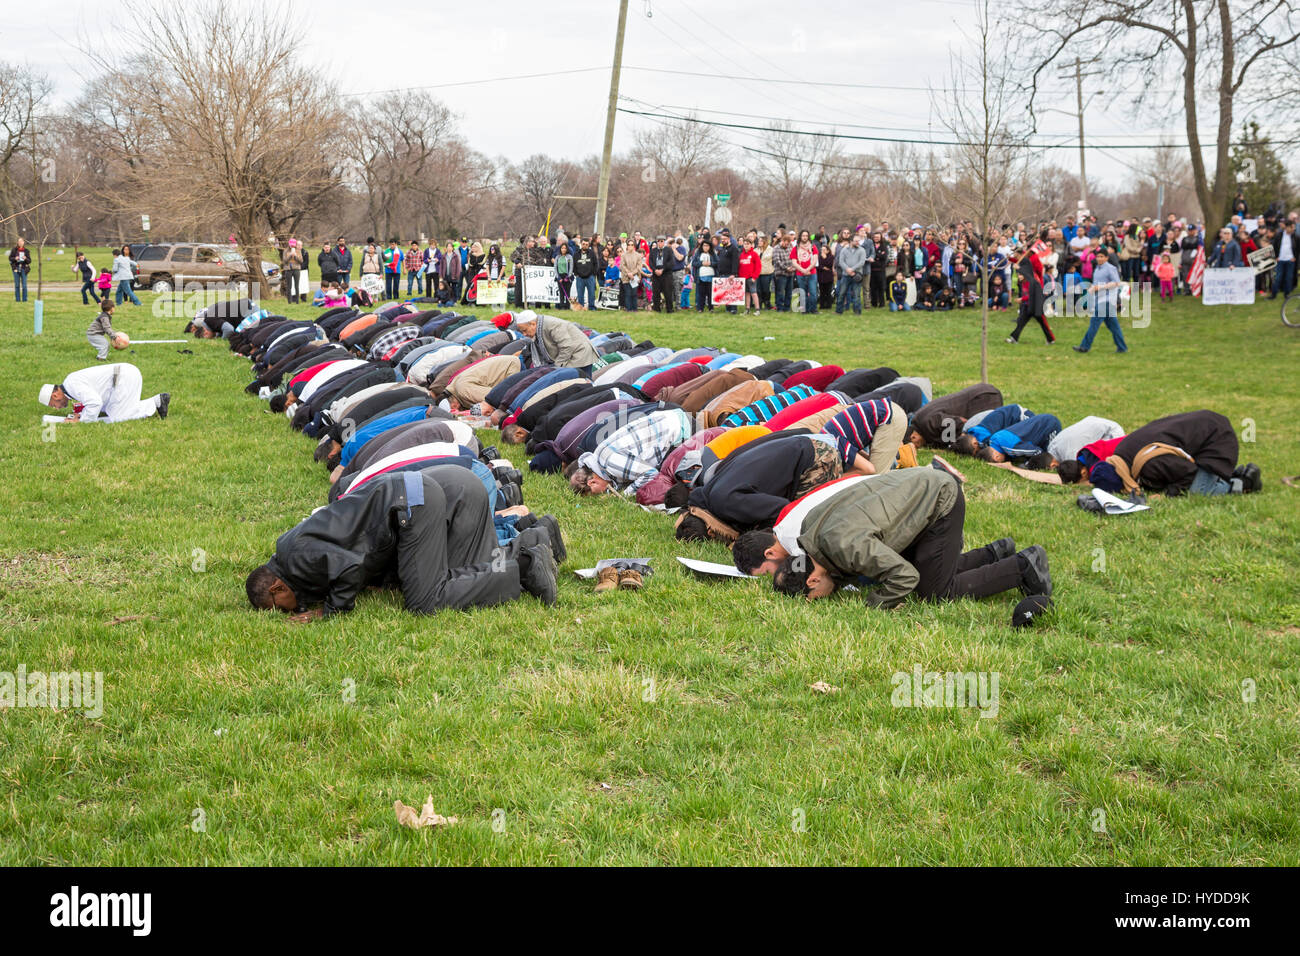 Dearborn, Michigan - Muslim men pray in a park near the American Muslim Society's mosque. The Friday prayers came at the end of a unity march with mos Stock Photo